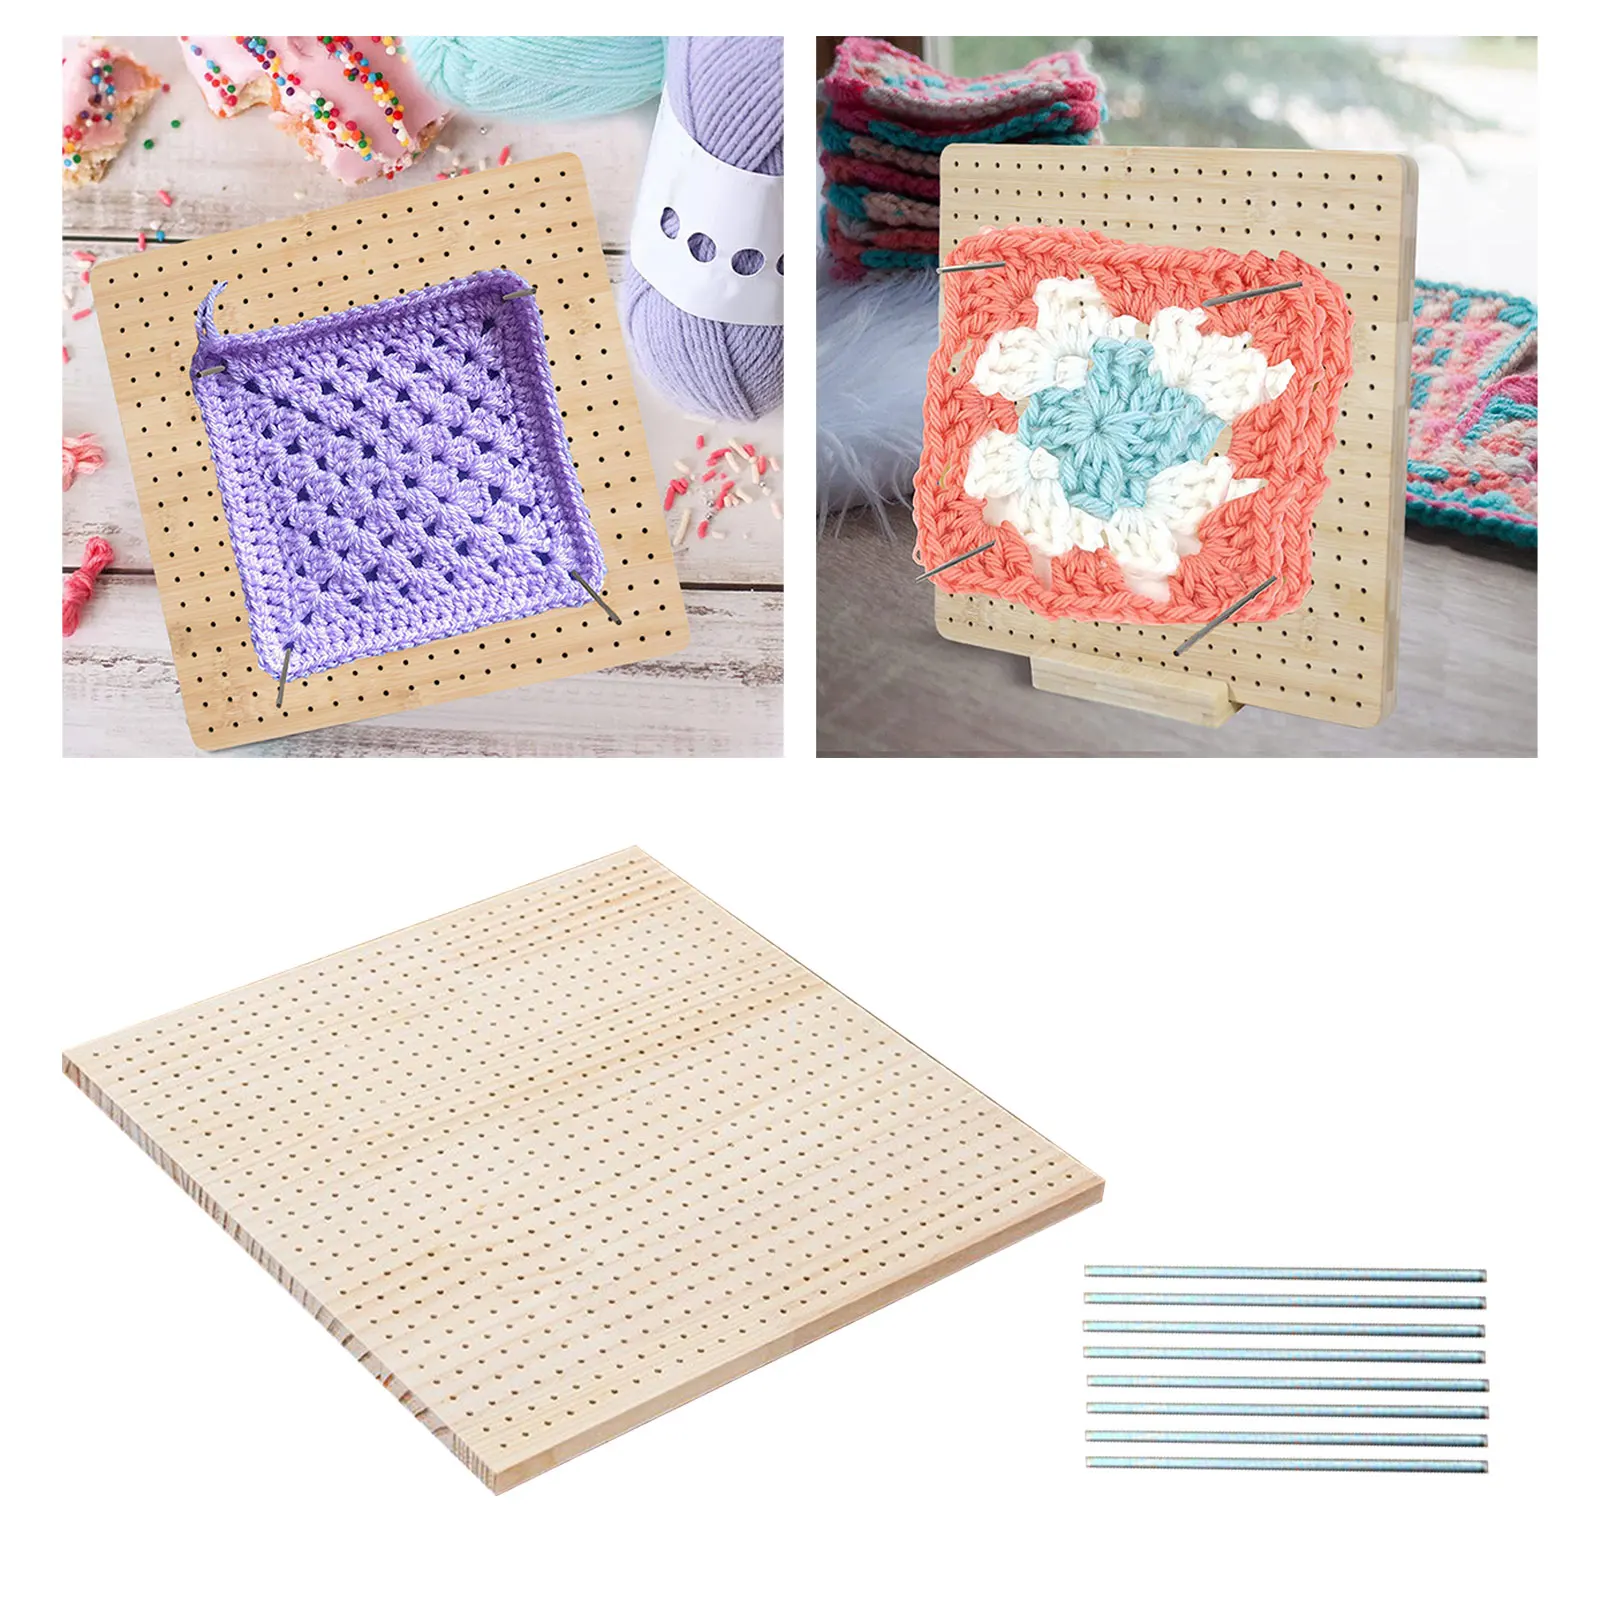 Crochet Blocking Board Crochet Projects Crafts Lover Beginners with Pegs  Blocking Mats and Pins for Crocheting Needlework - AliExpress